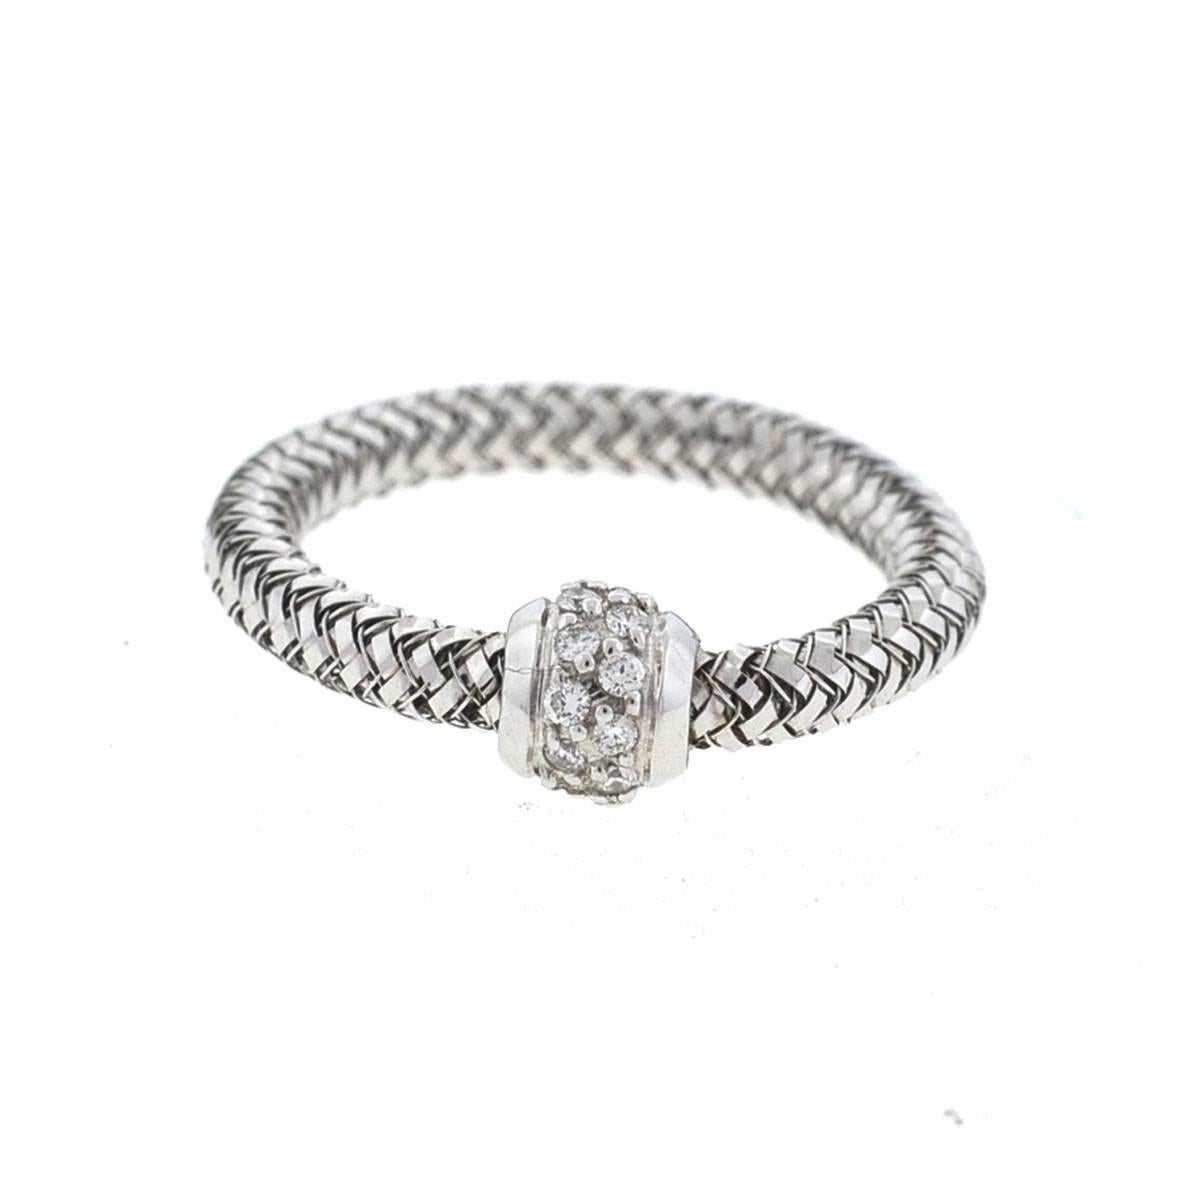 Company - Roberto Coin
Style - Primavera Flexible Ring w/ Diamonds
Metal - 18k White Gold
Stones - SizeDiamonds Approx. .10 ctw
Weight - 2.2 G
Size - 6
Includes - Ring Only
5628-6uee